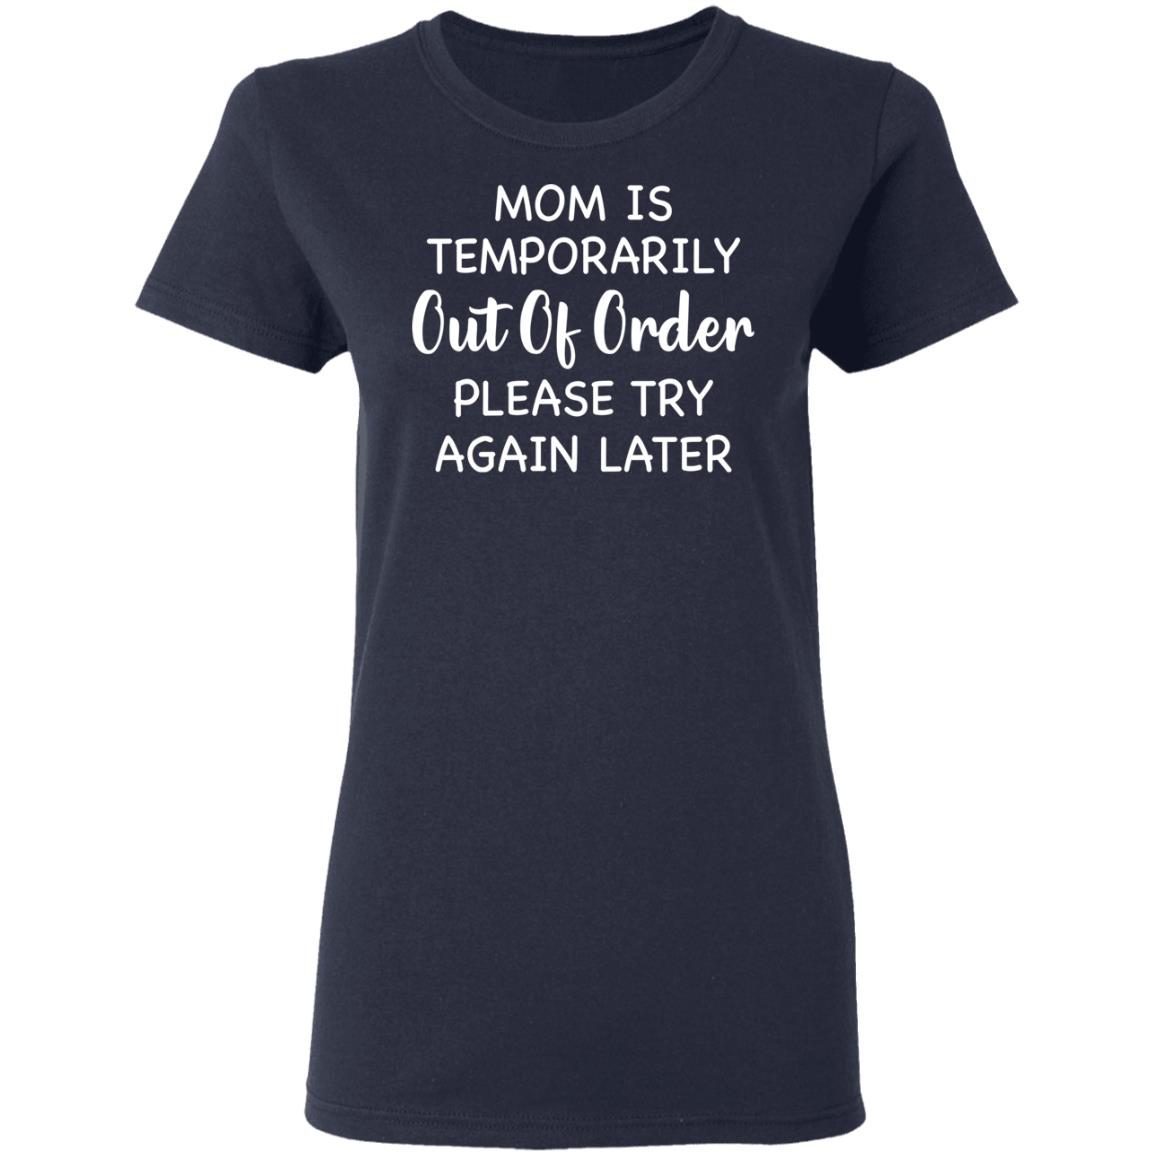 Mom is temporarily out of order please try again later shirt 3